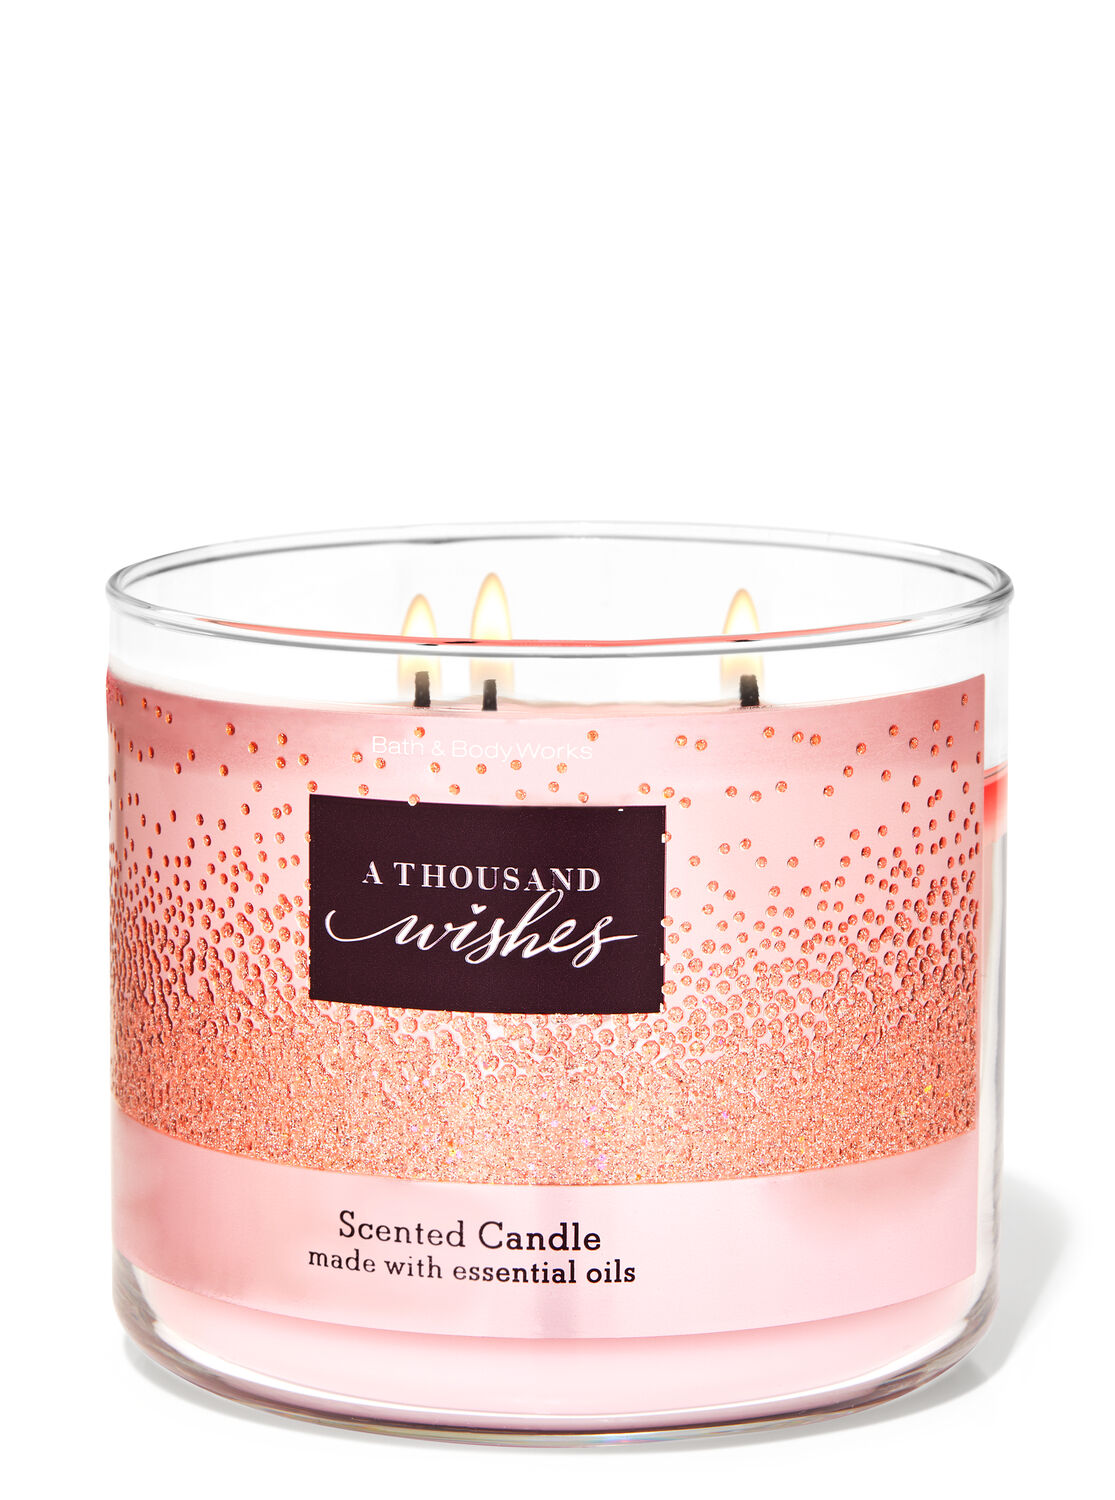 Bath and Body Works A THOUSAND WISHES 3-Wick Candle 14.5 oz NEW * 